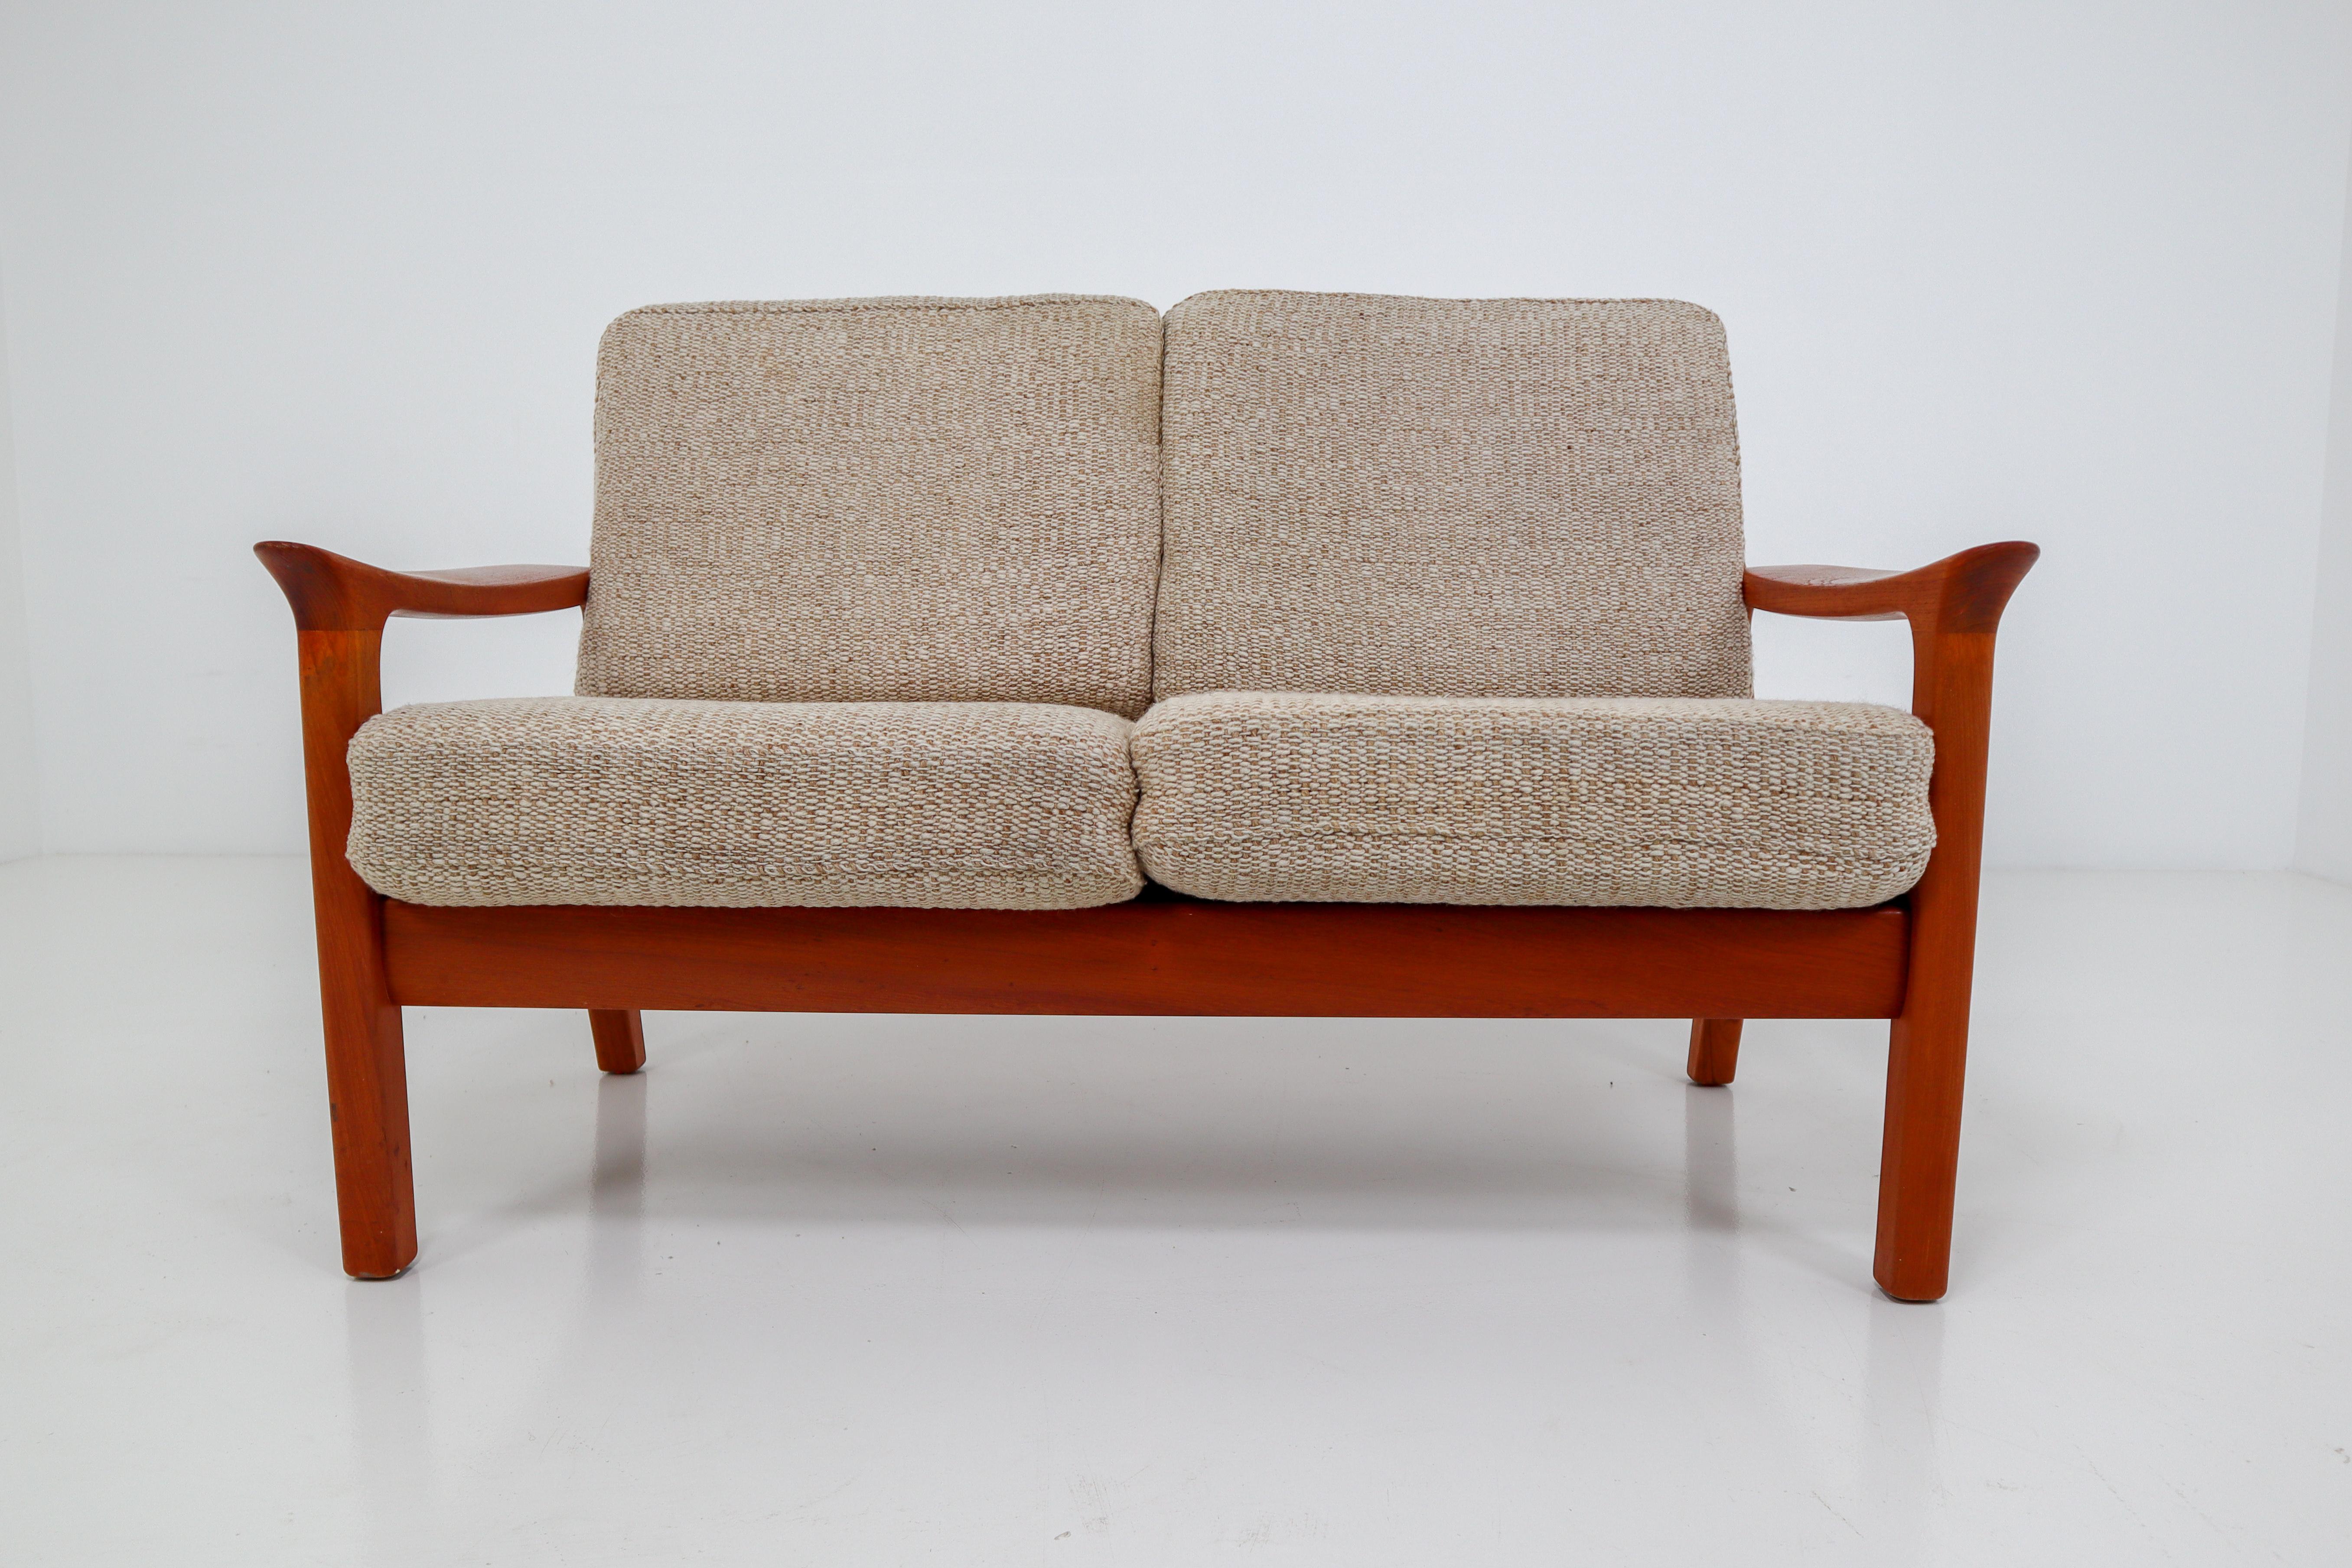 Wool Two-Seat Sofa in Teak by Juul Kristensen and Glostrup Furniture, 1960s